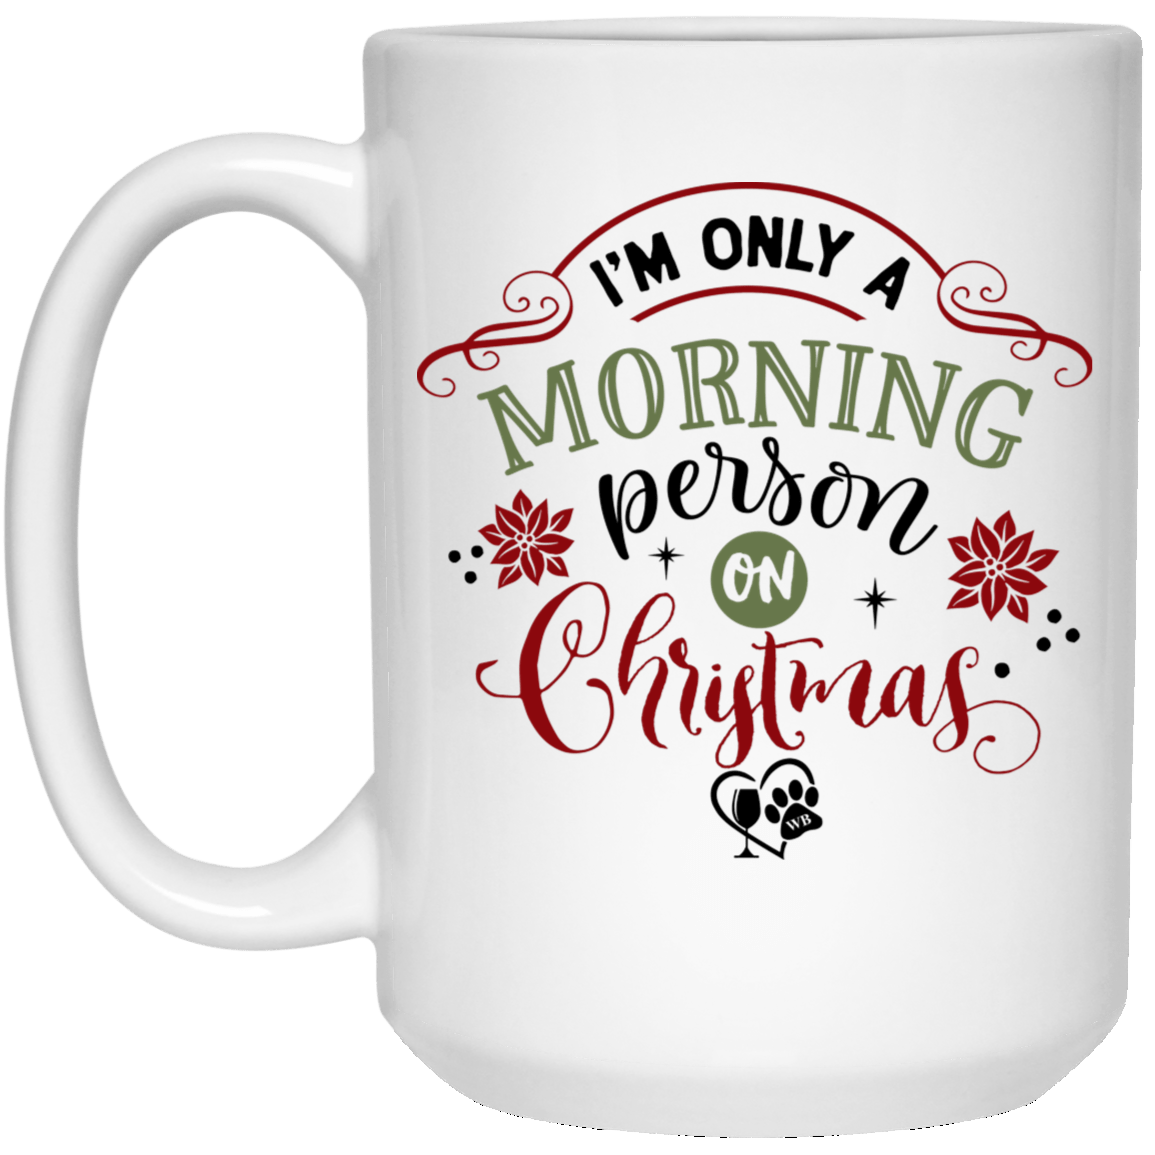 Drinkware White / One Size Winey Bitches Co " I'm Only A Morning Person On Christmas" 15 oz. White Mug WineyBitchesCo